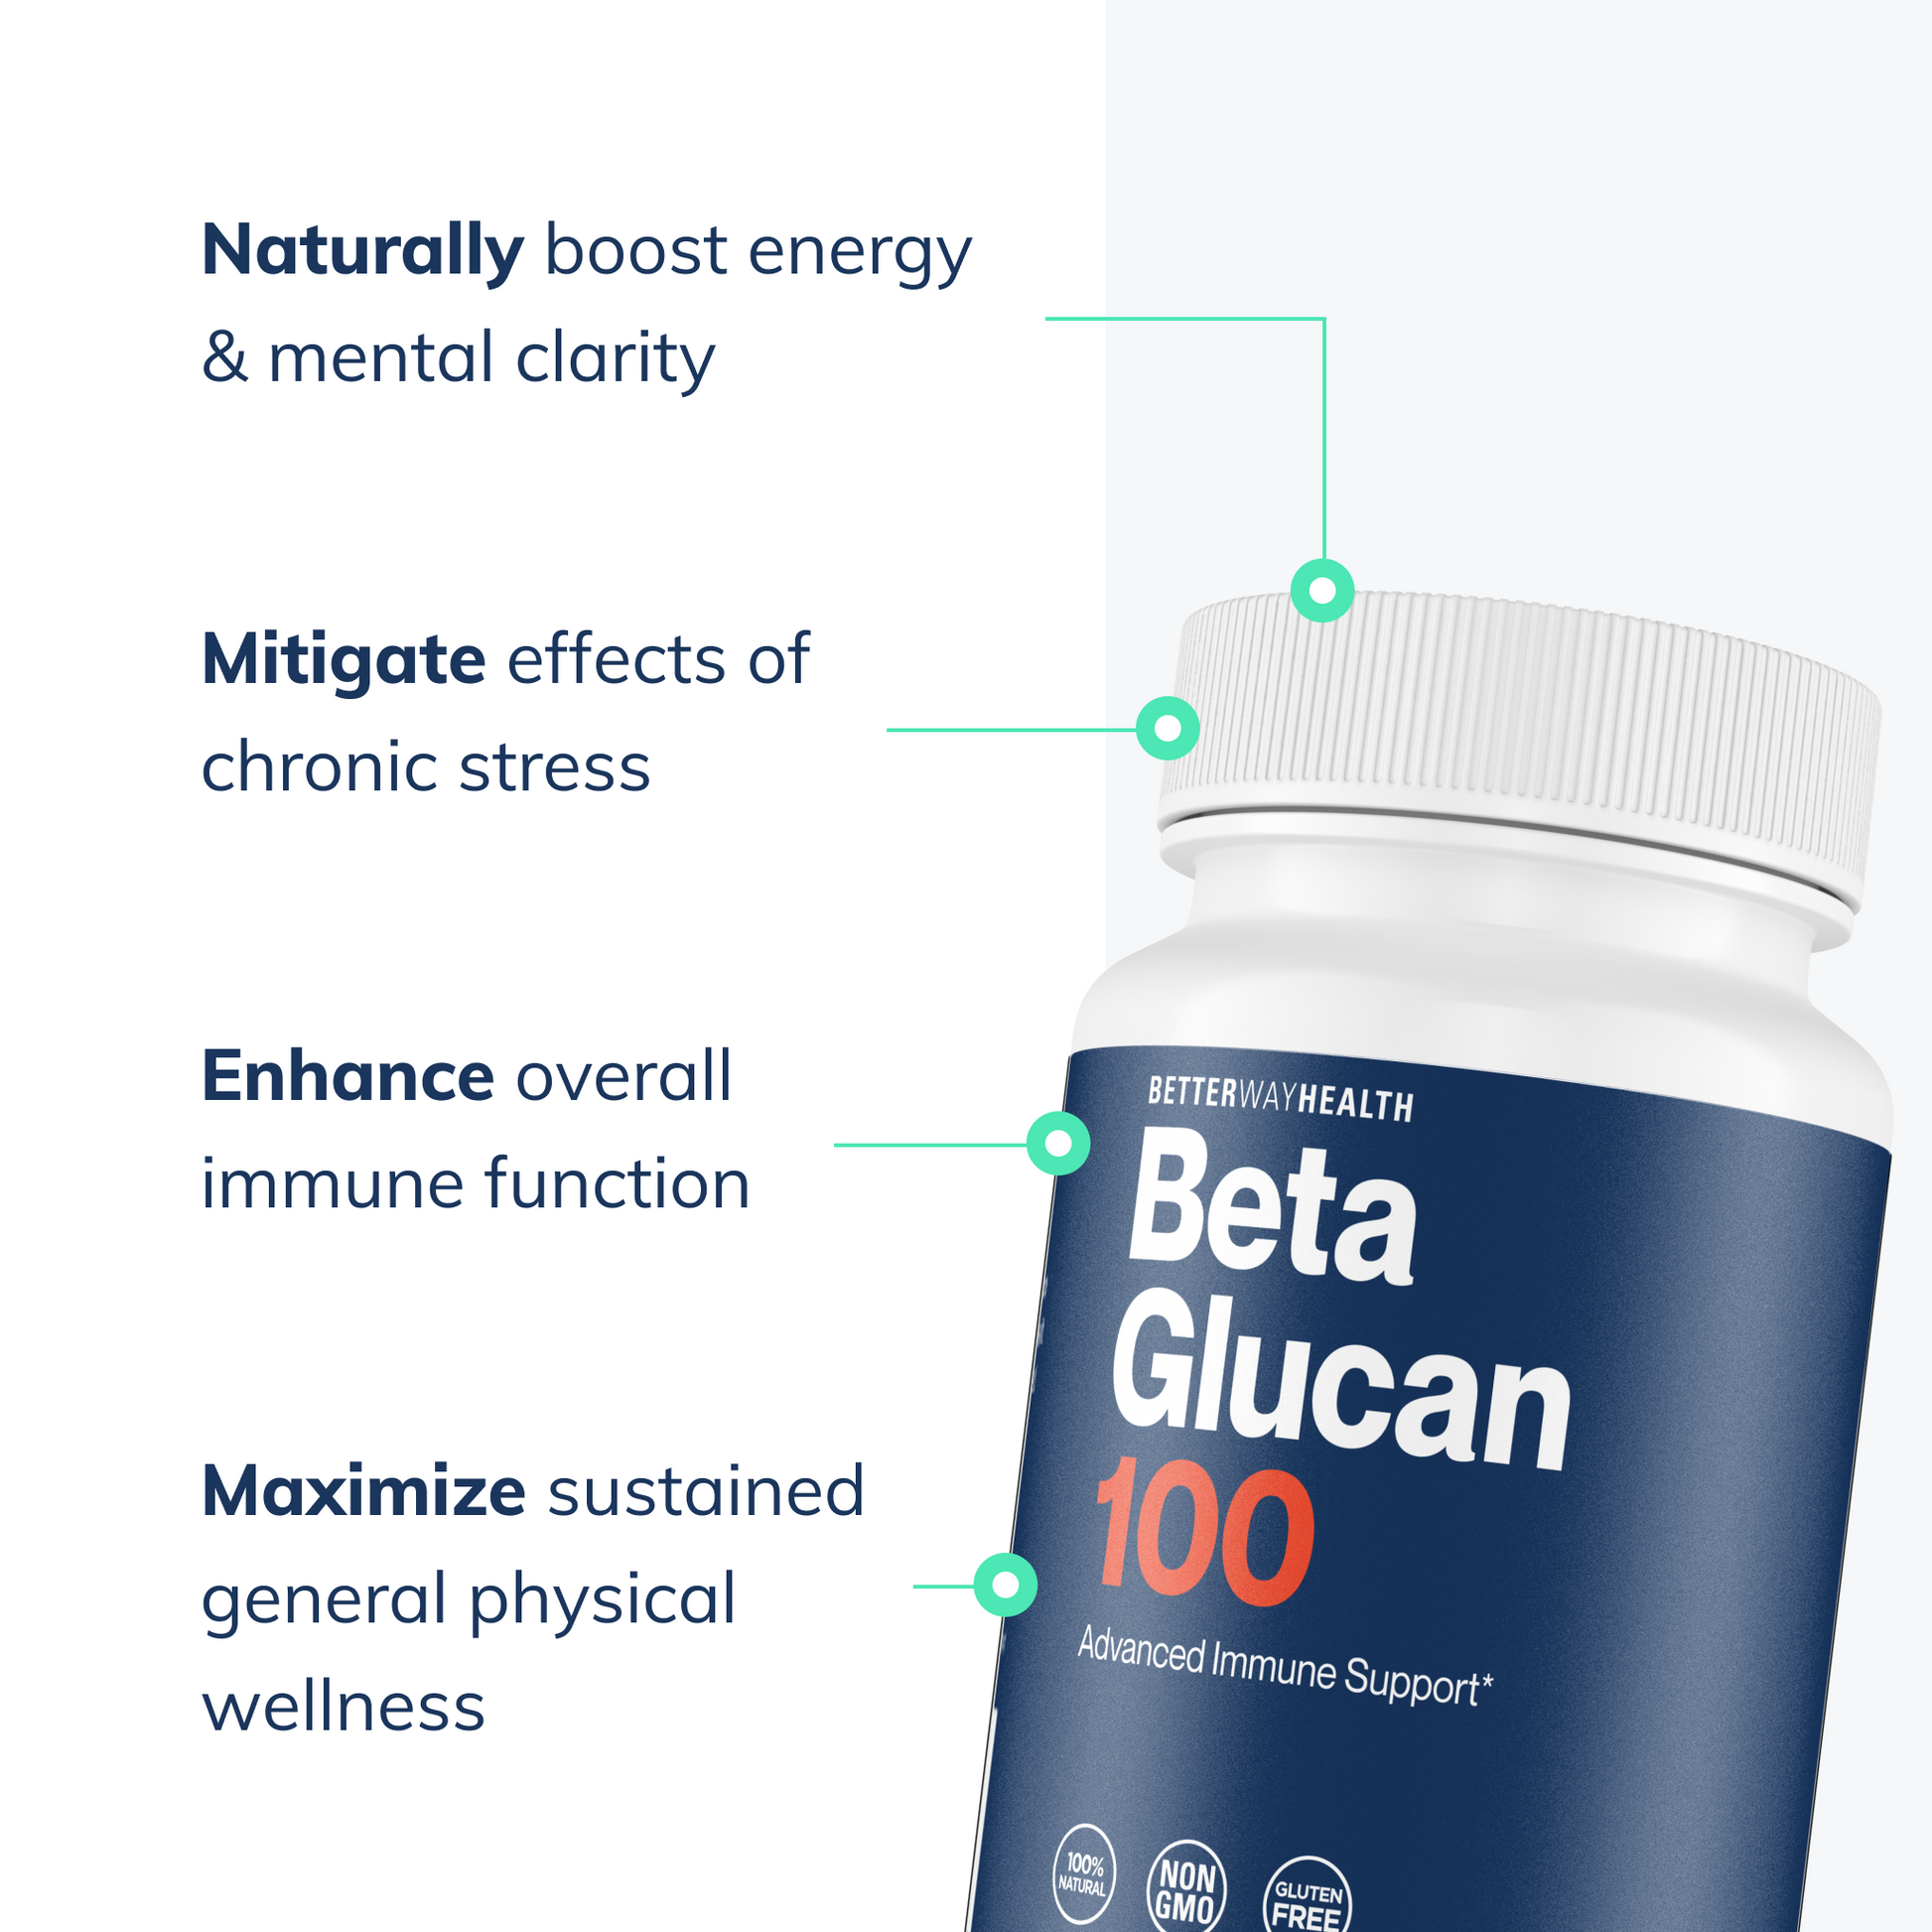 image showing naturally boosted energy, enhanced overall immune function and immunity strength provided by beta glucan supplements